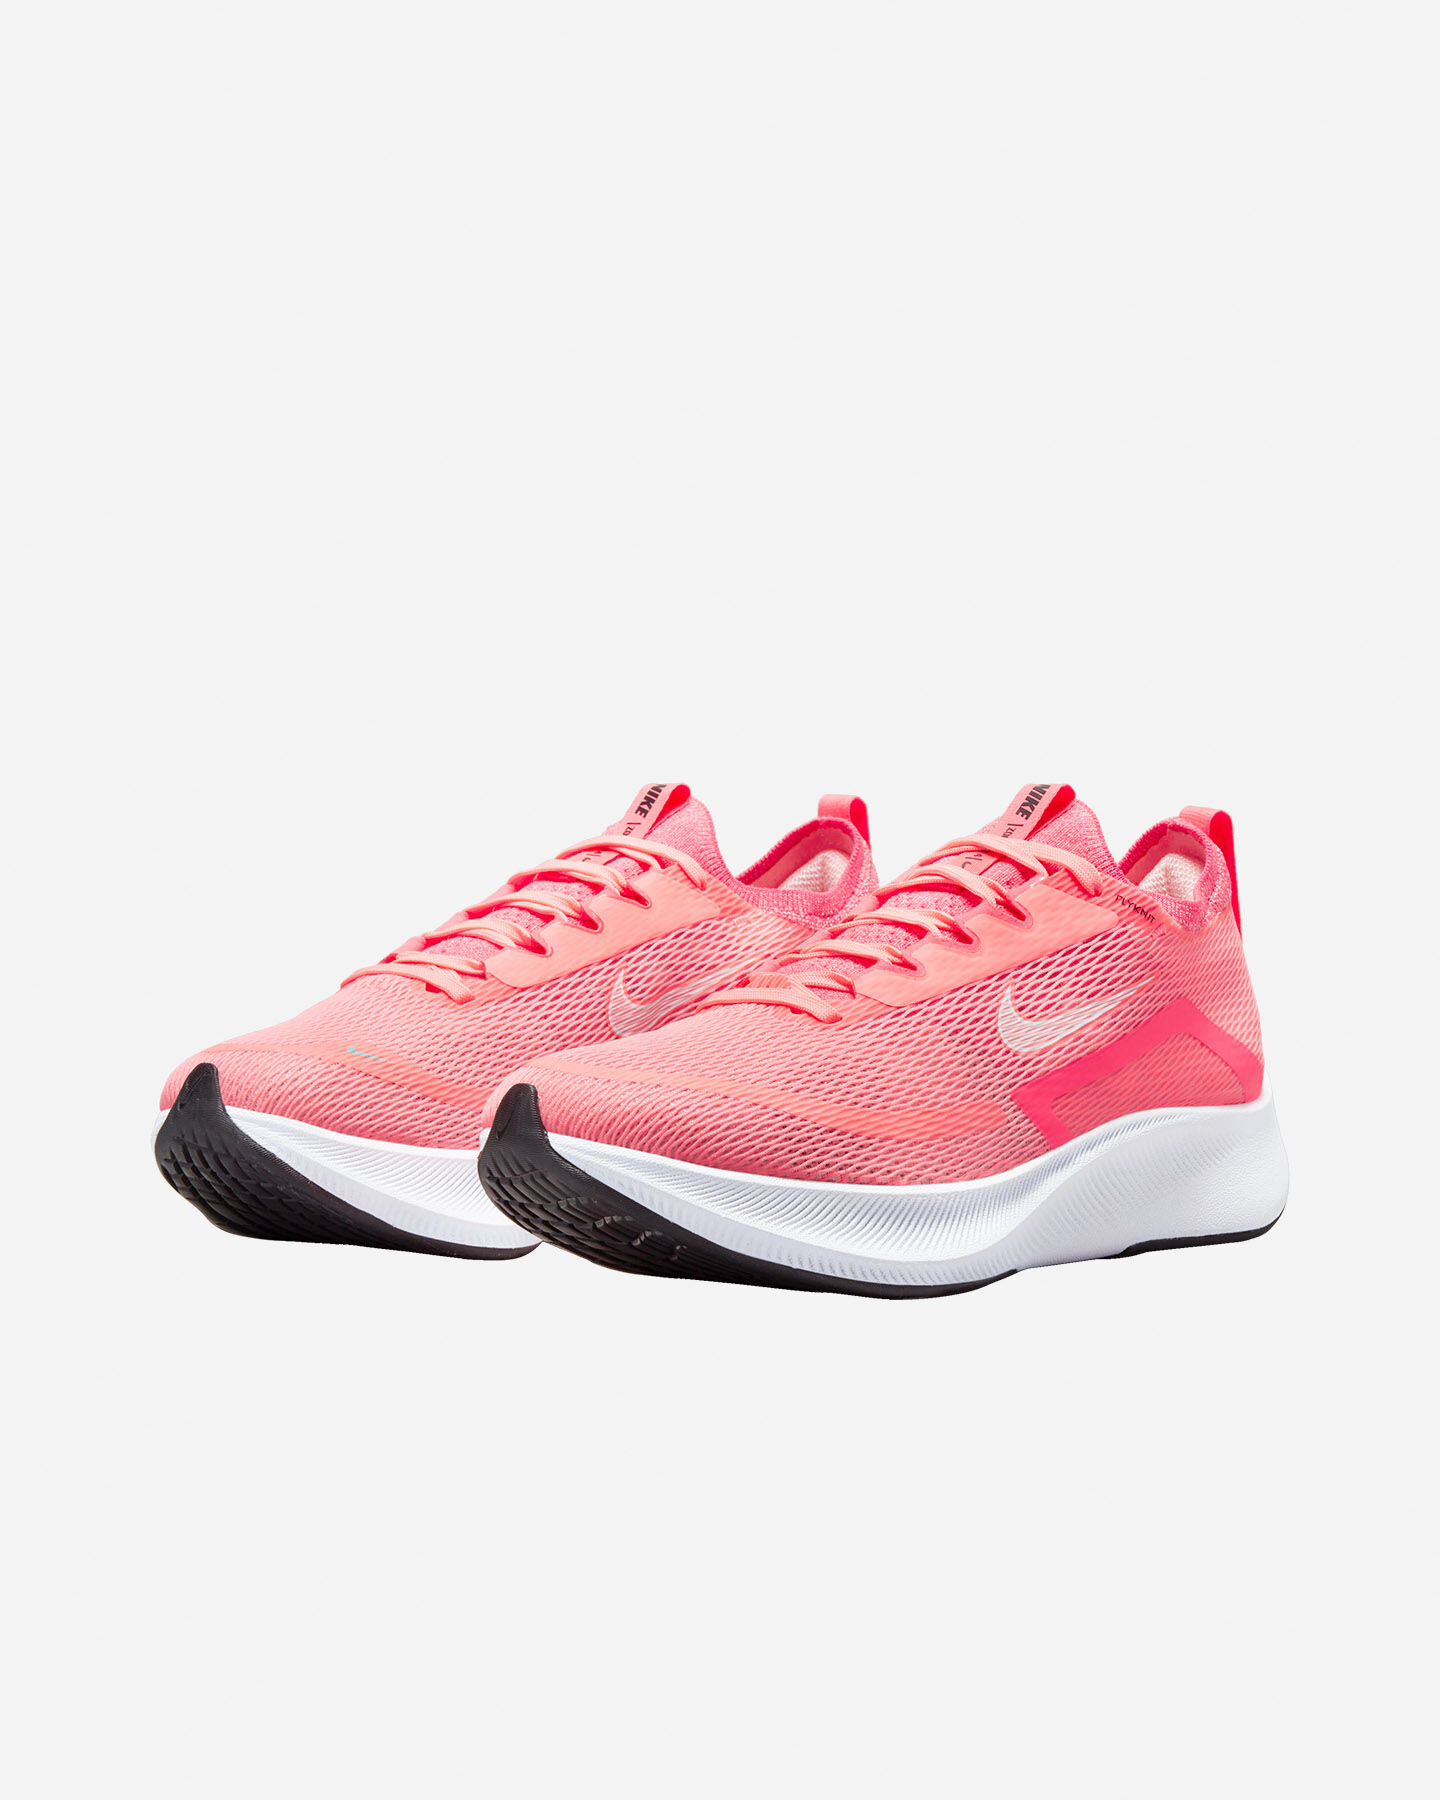  Scarpe running NIKE ZOOM FLY 4 W S5350282|600|5 scatto 1